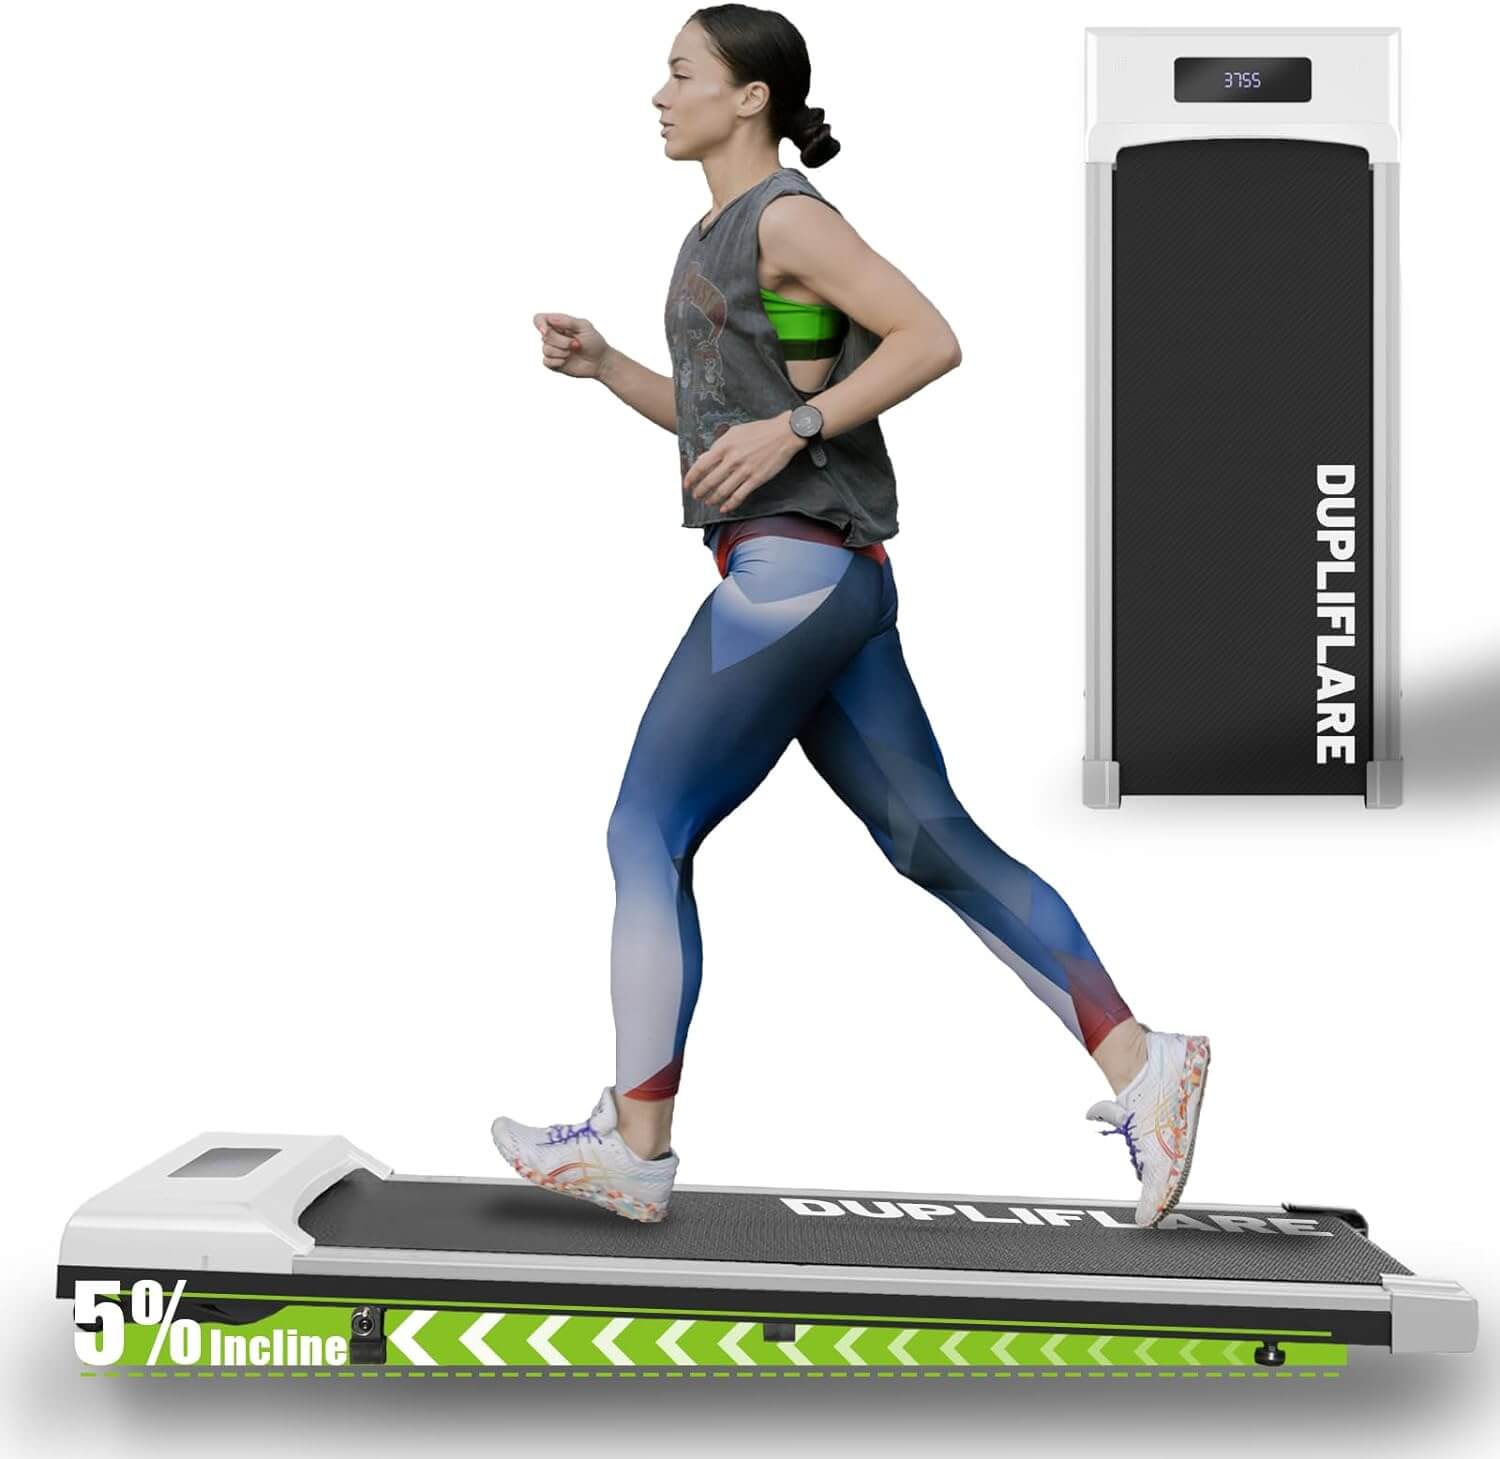 DUPLIFLARE Walking Pad With Incline product description about a woman show walking.